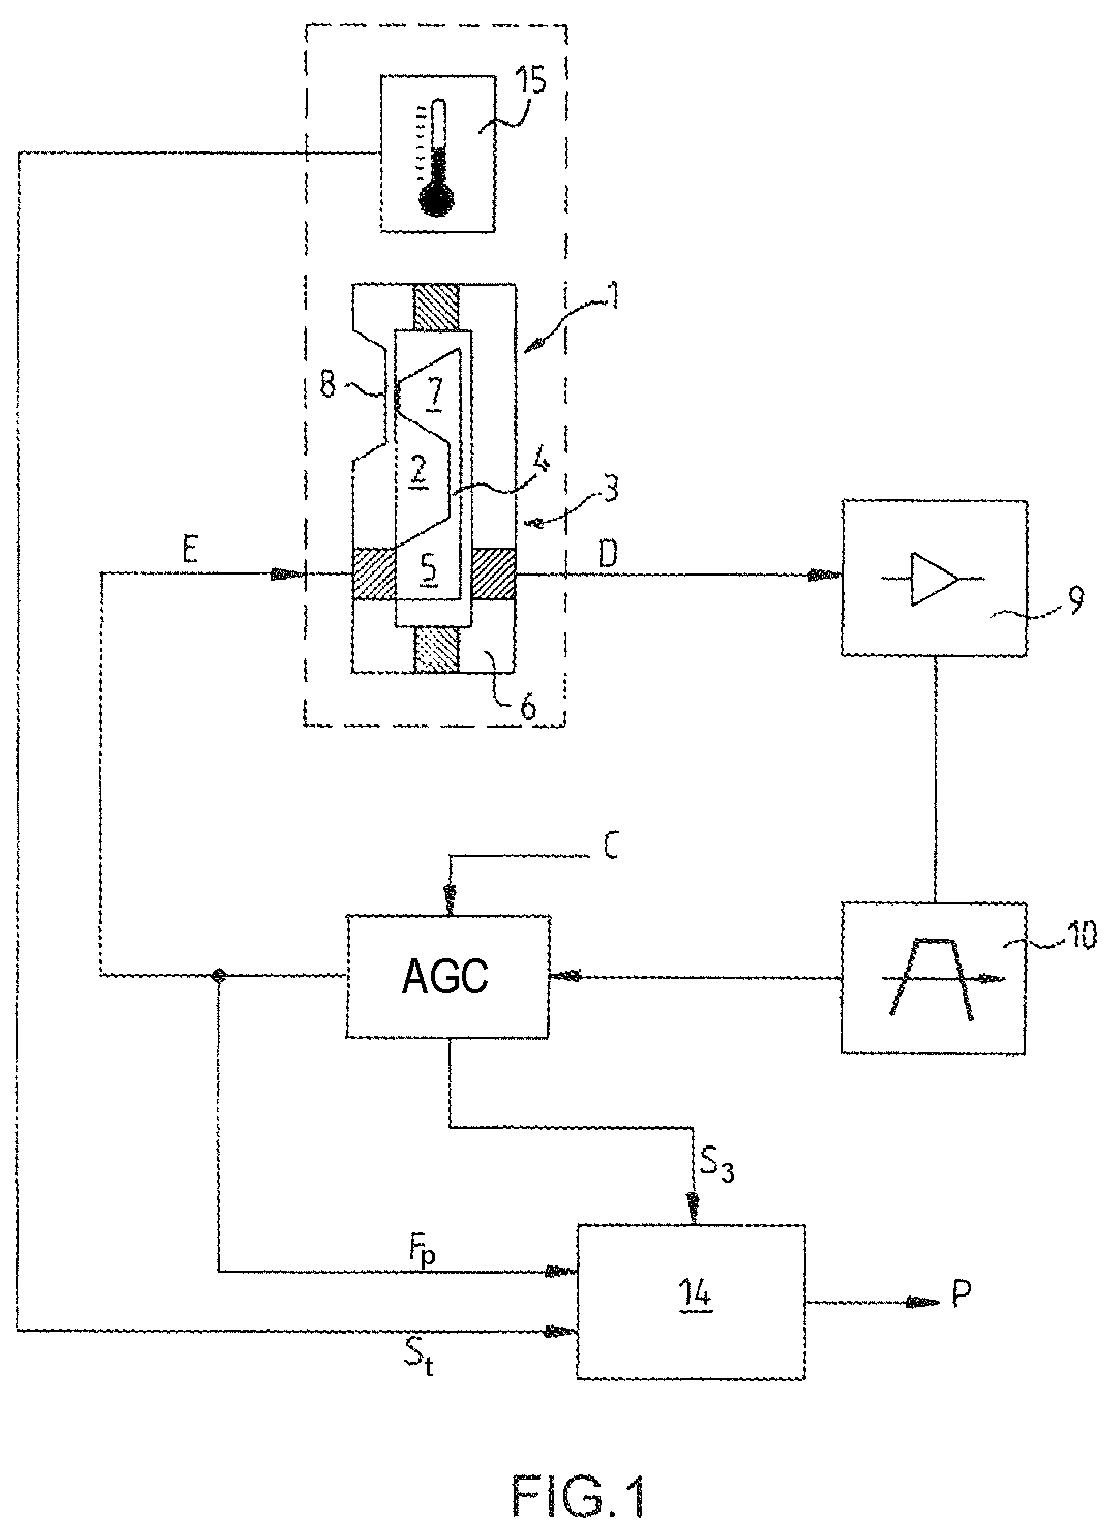 Resonator measurement device and method employing the device